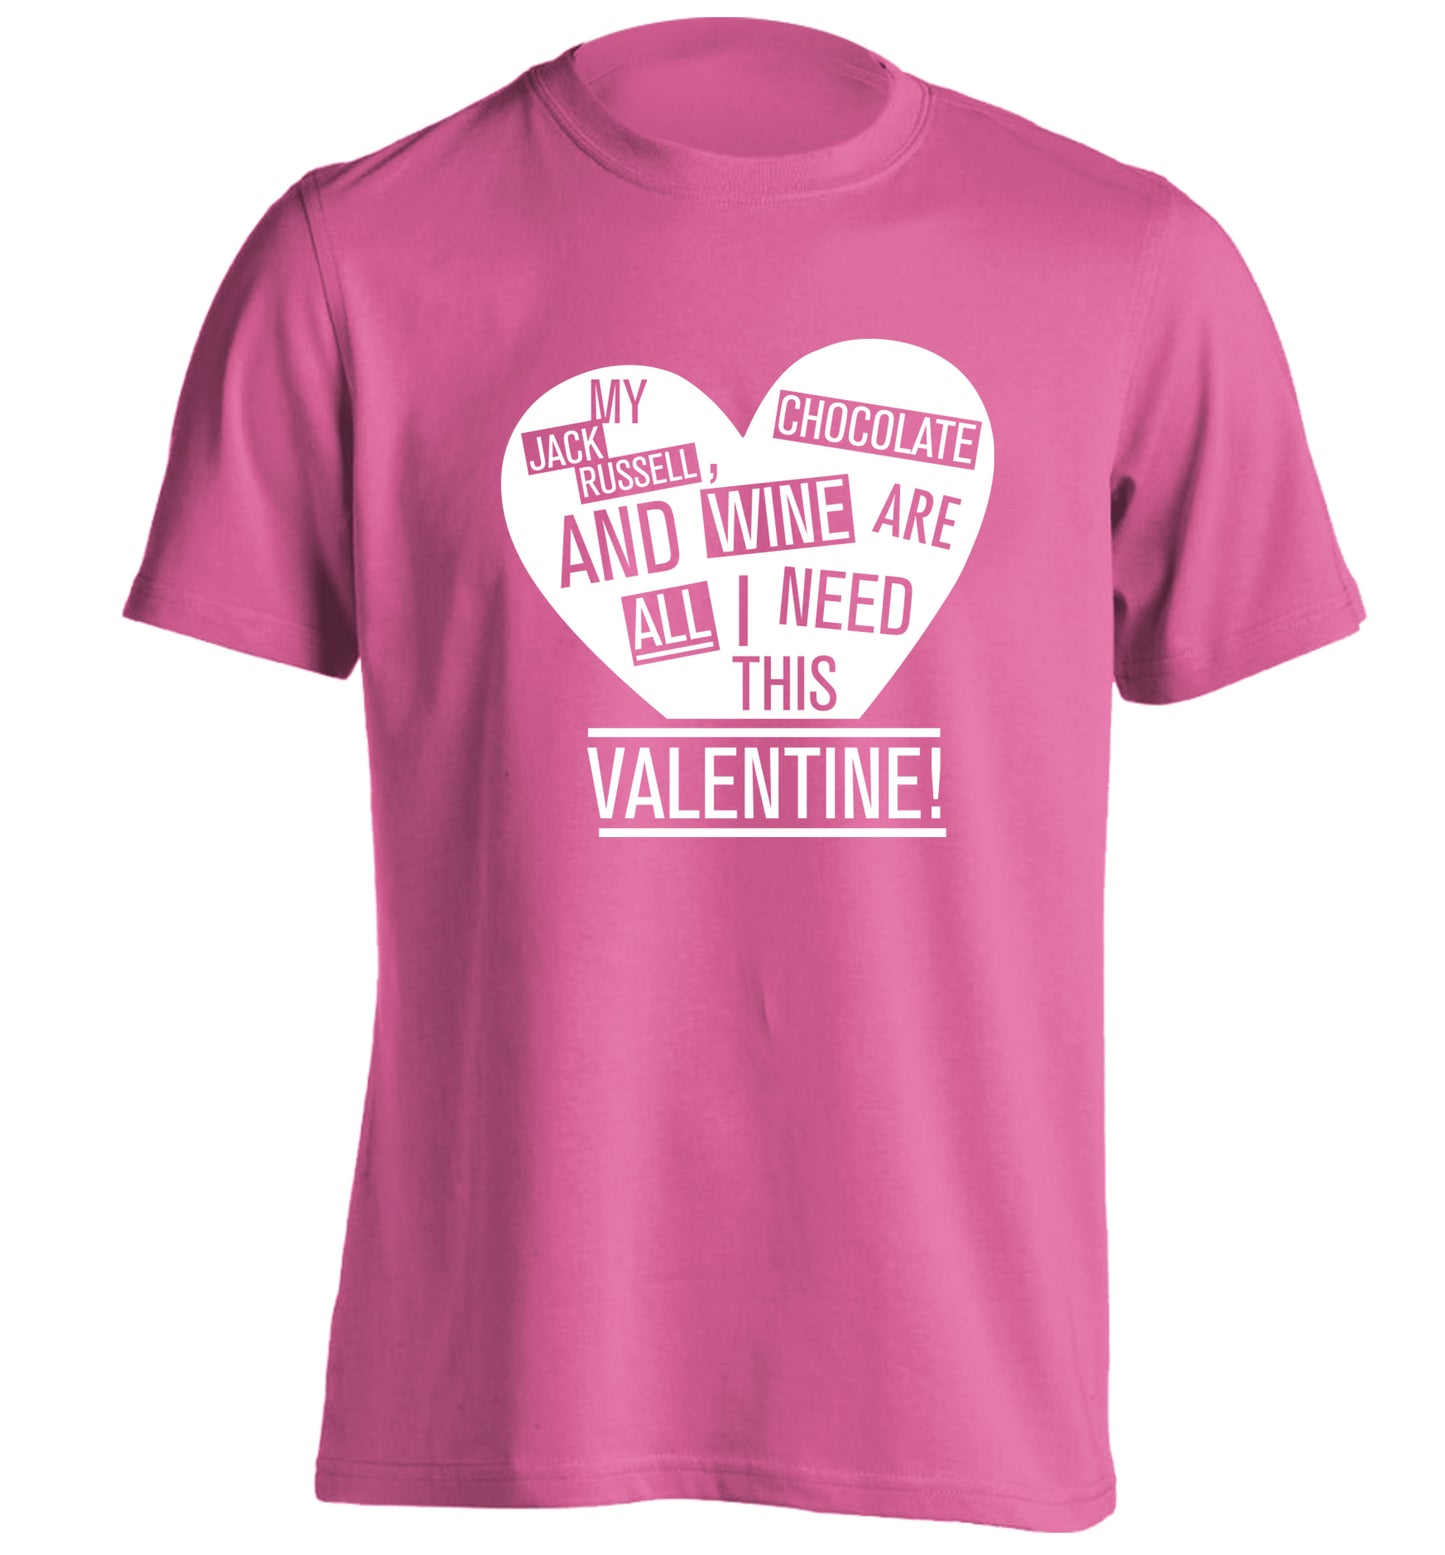 My jack russell, chocolate and wine are all I need this valentine! adults unisex pink Tshirt 2XL